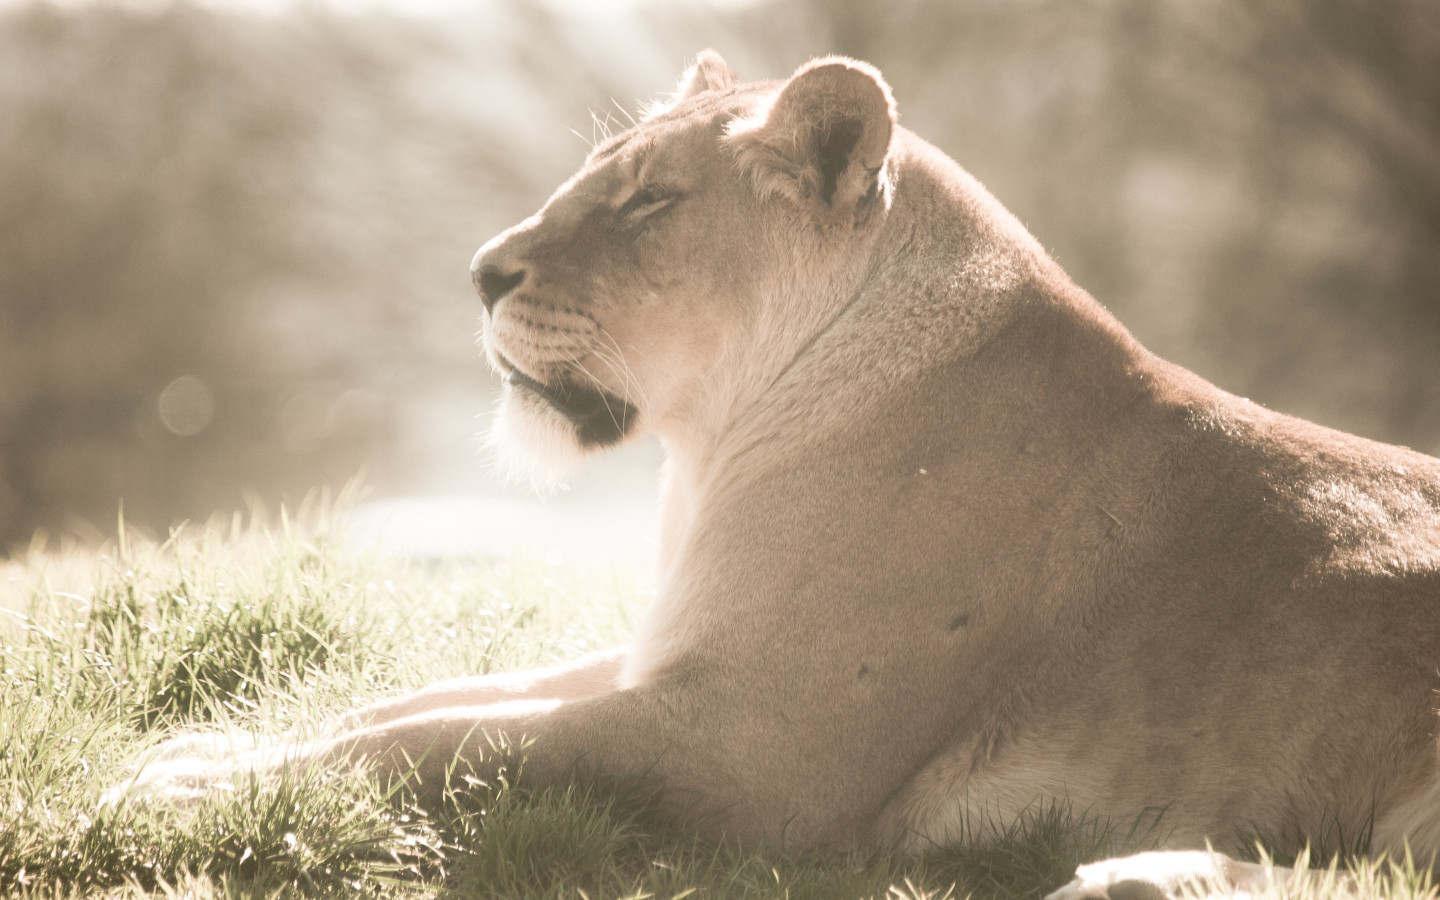 Lioness at Whipsnade Zoo wallpaper 1440x900